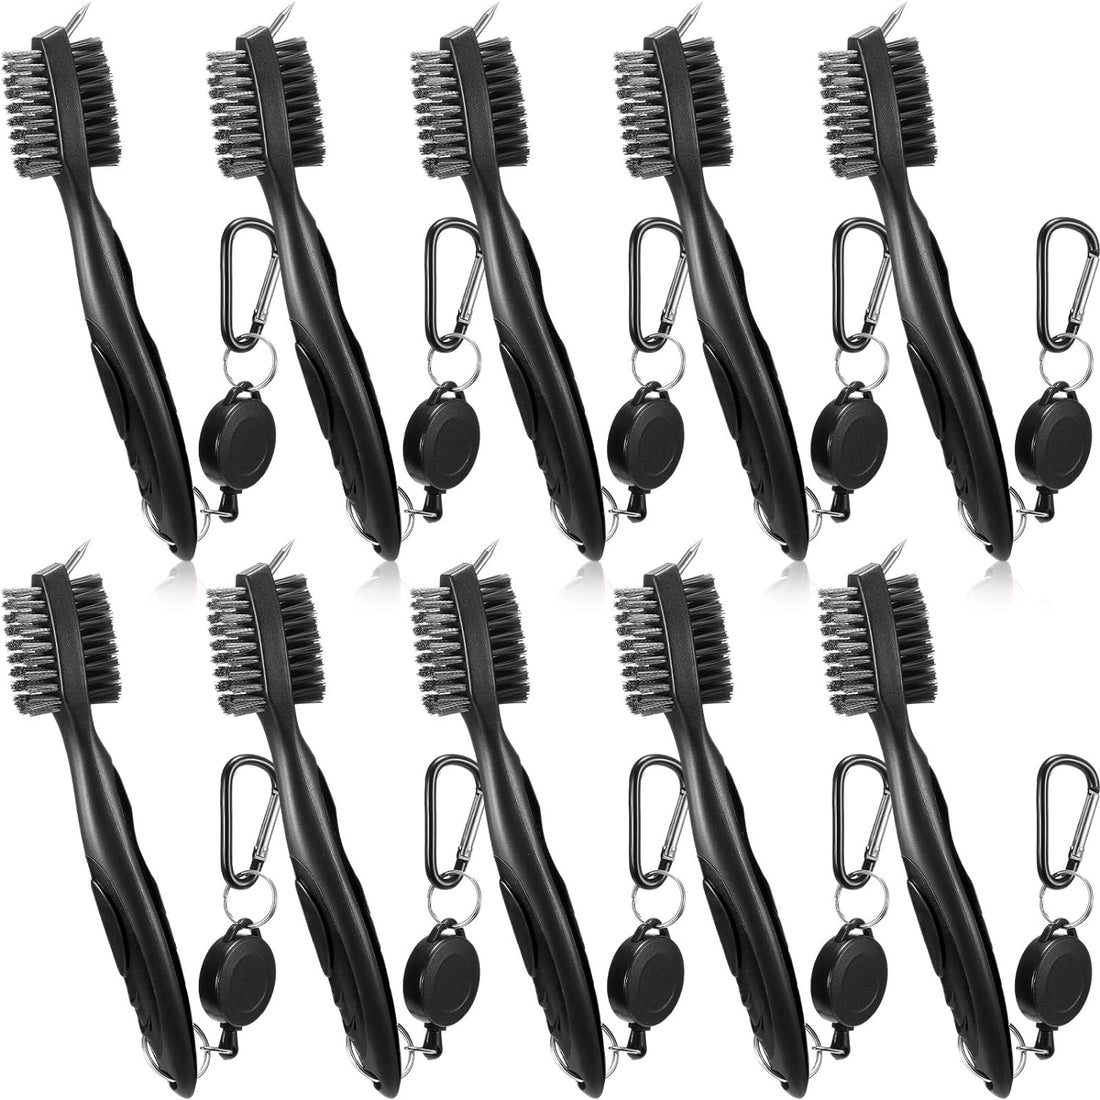 Mifoci 10 Pieces Golf Club Brush and Club Groove Cleaner with 2 ft Retractable Zip-line and Aluminum Hook Buckle Golf Scrub Brush Comfort Handle Cleaning Tools for Golf Club Bag (Black)